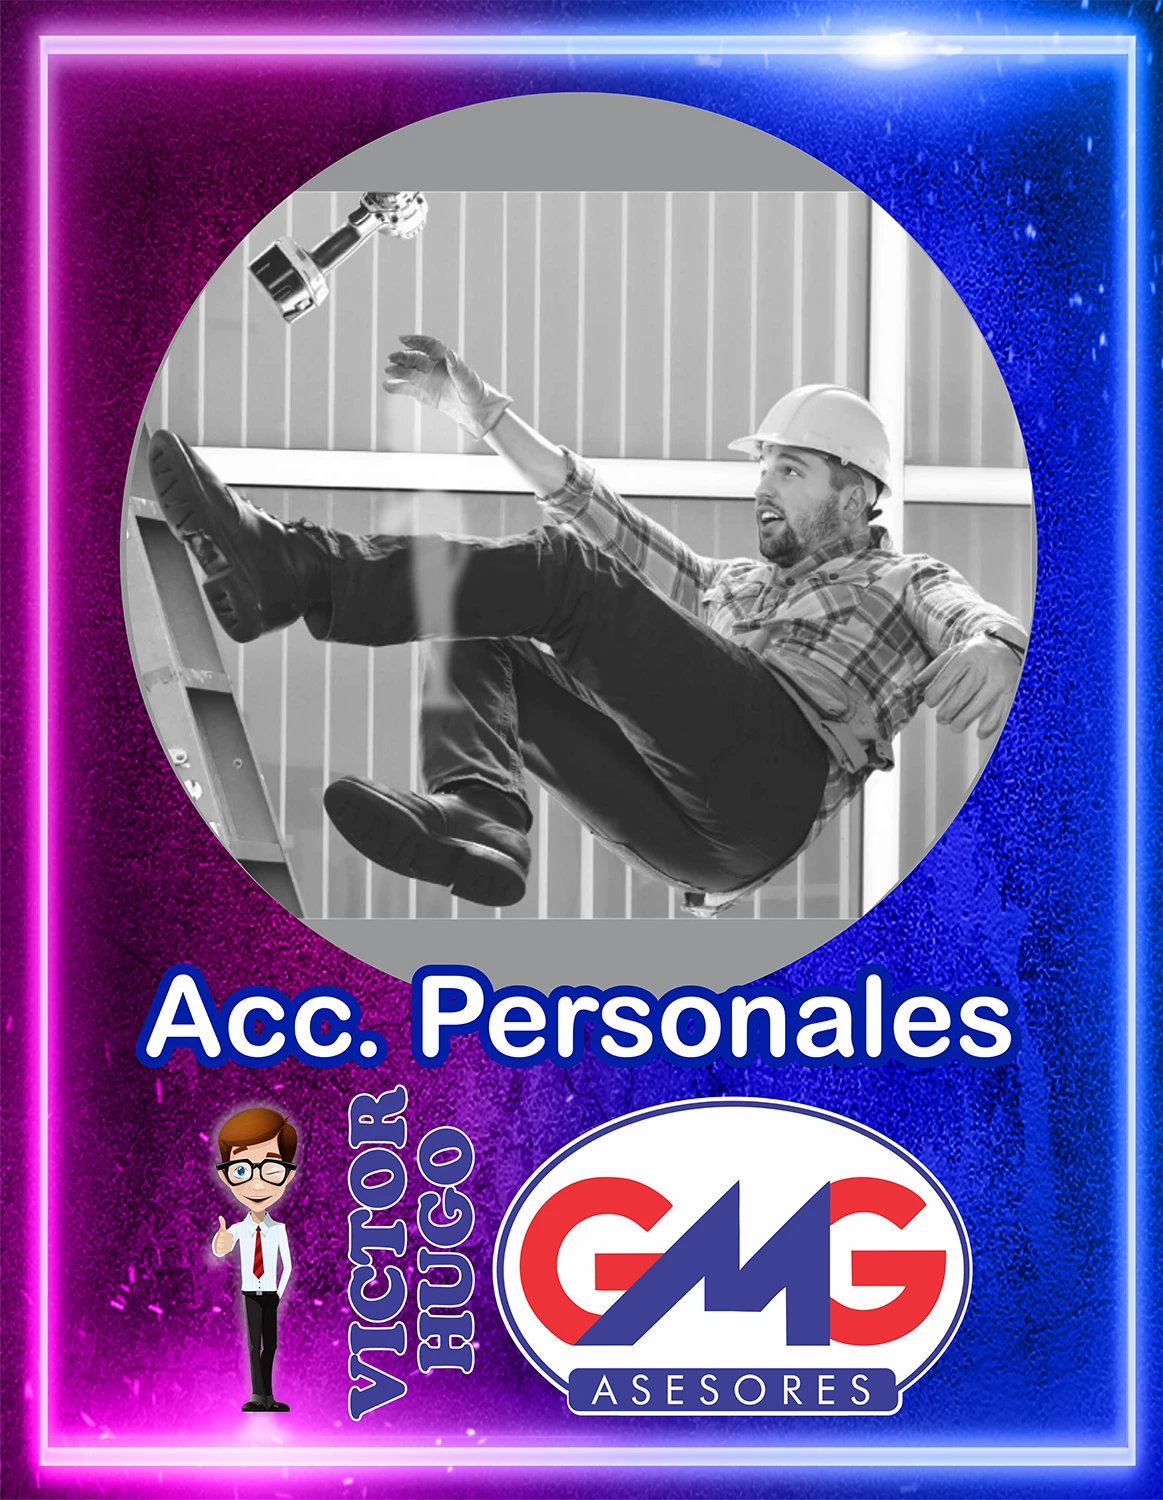 Accidentes Personales - GMG Asesores